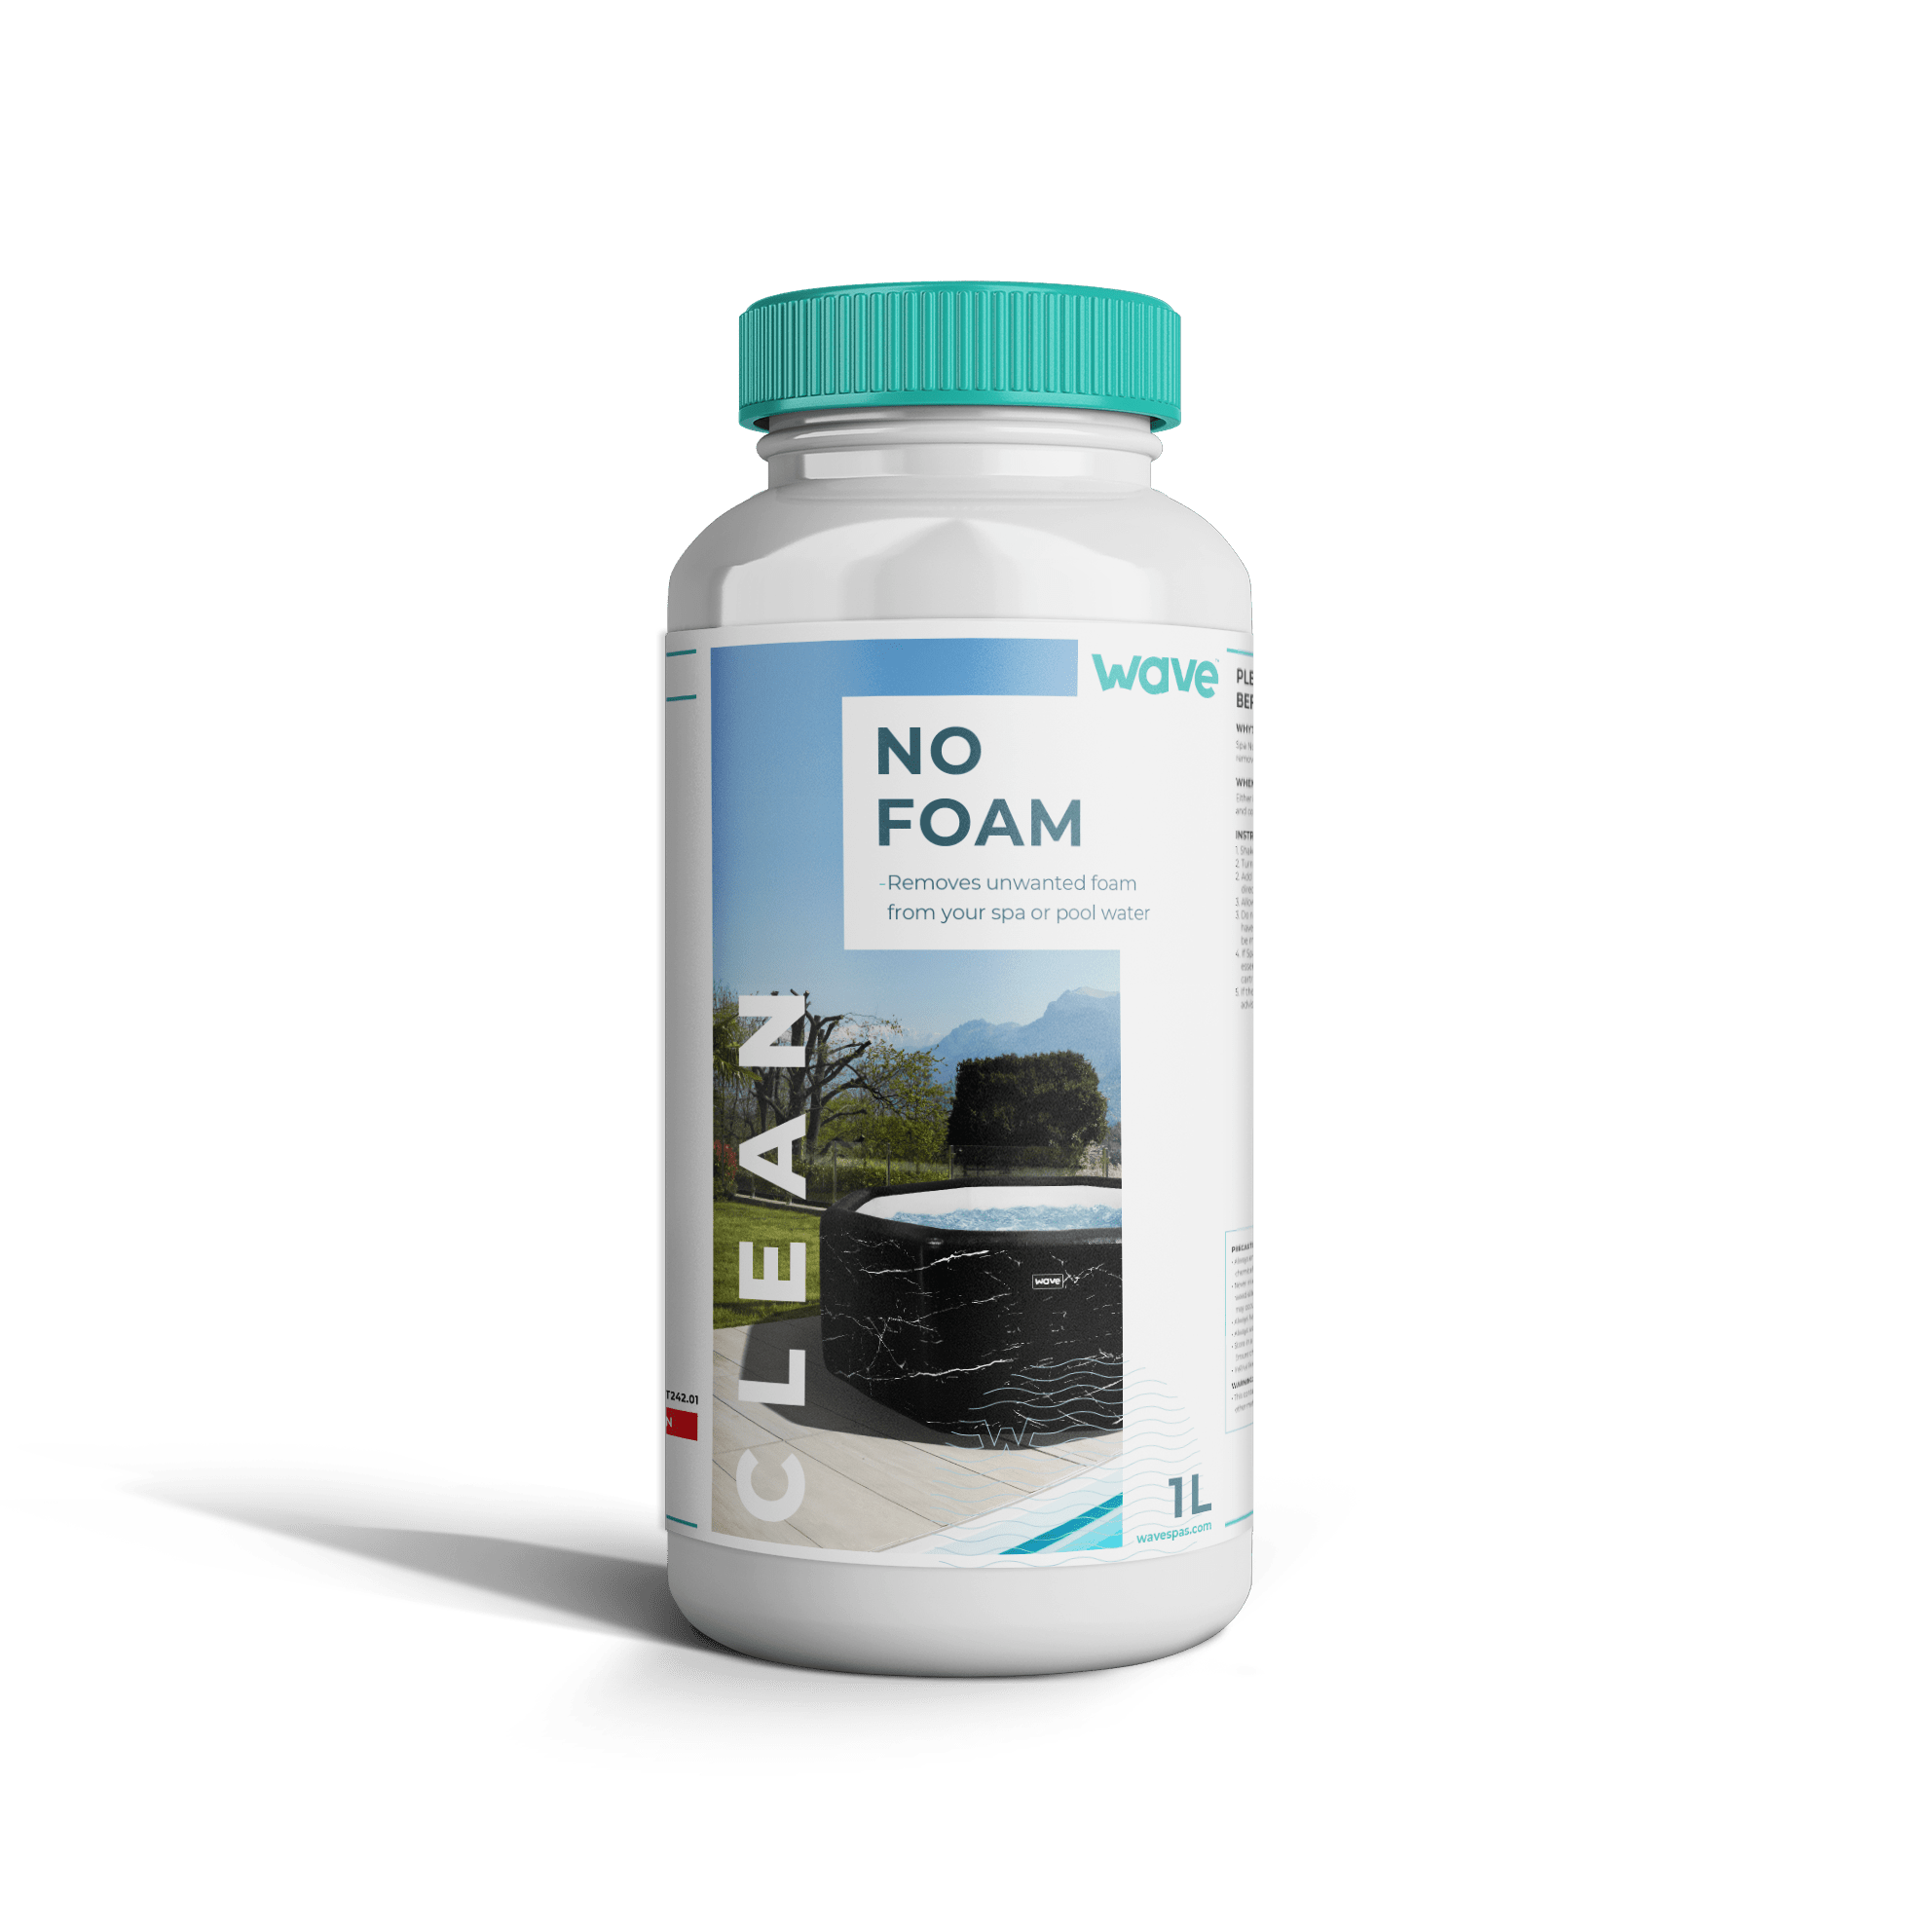 Hot Tub No Foam | Pool and Spa Foam Remover | 1L - Spa Chemicals - Wave Spas USA